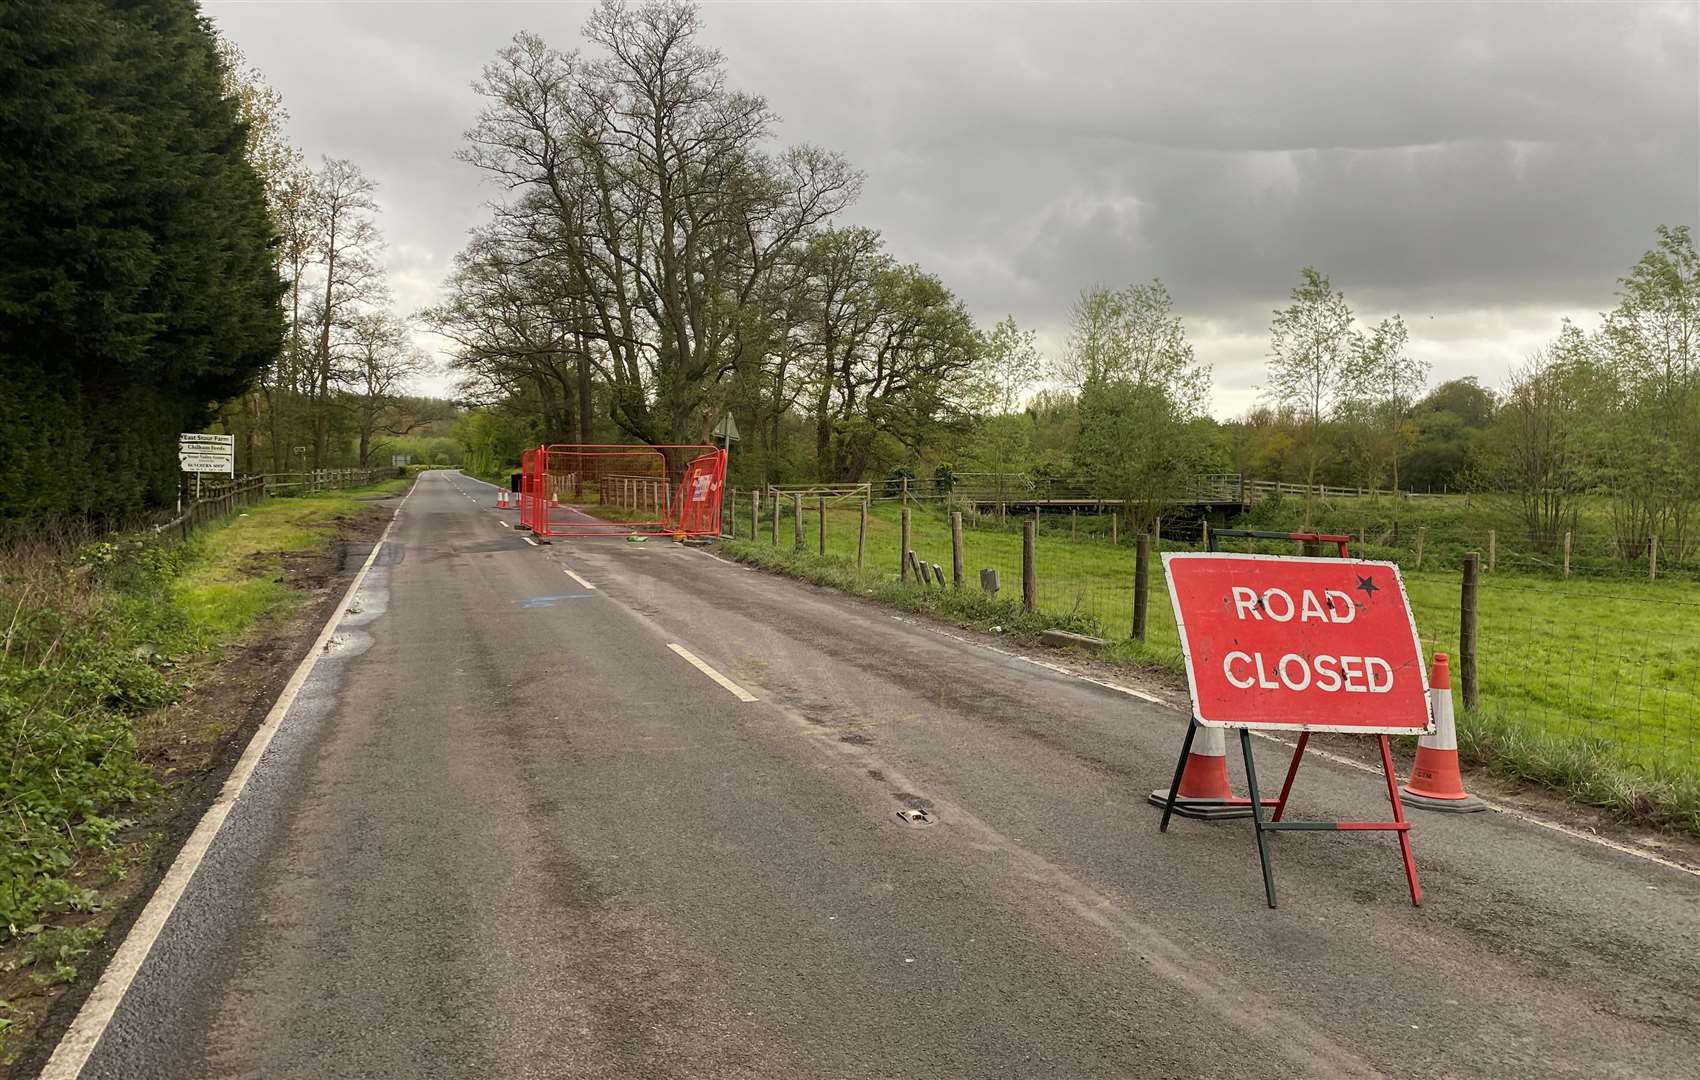 The A28 Ashford Road has finally reopened after almost a month of closures